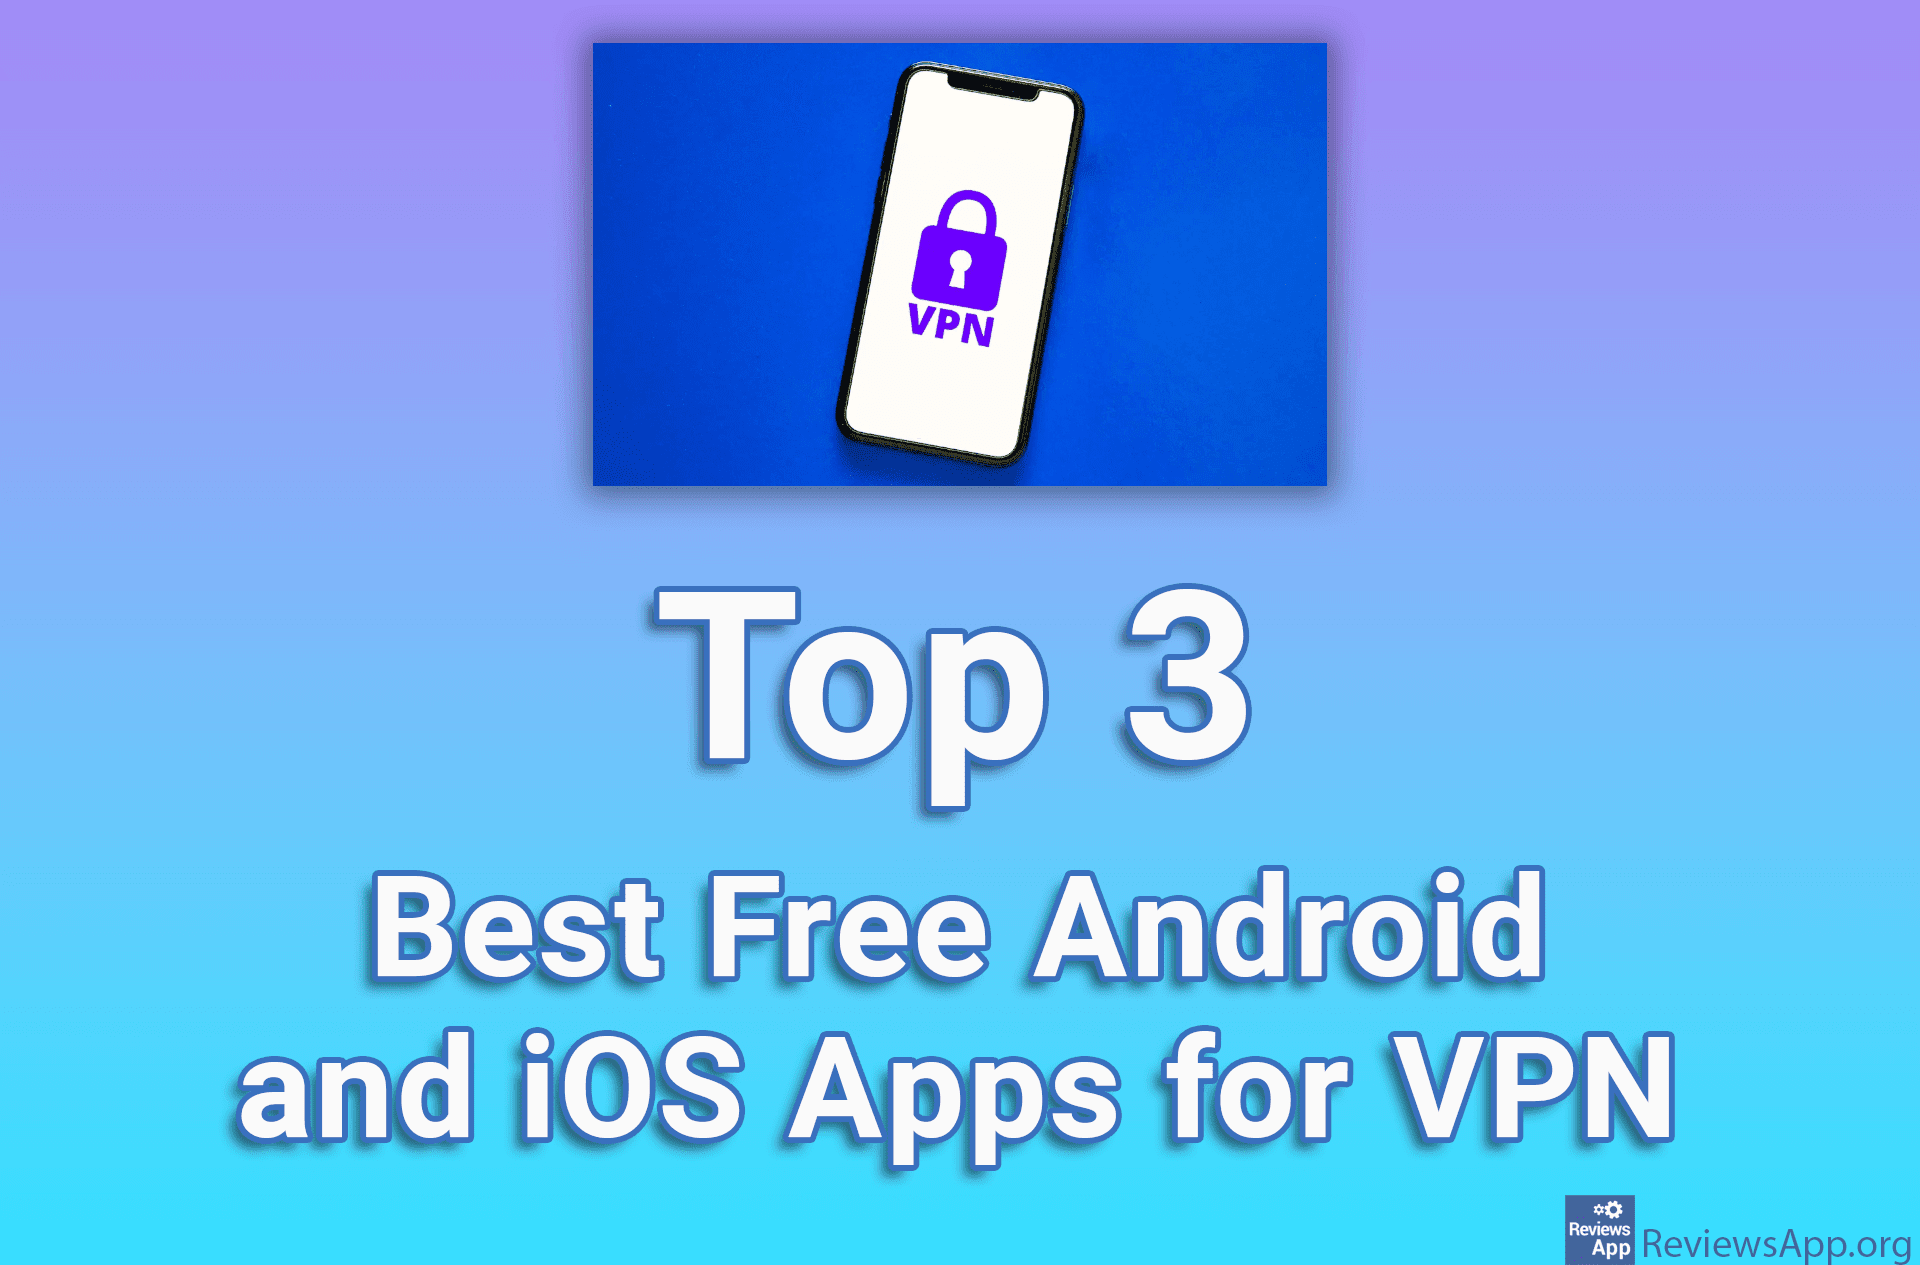 Top 3 Best Free Android and iOS Apps for VPN